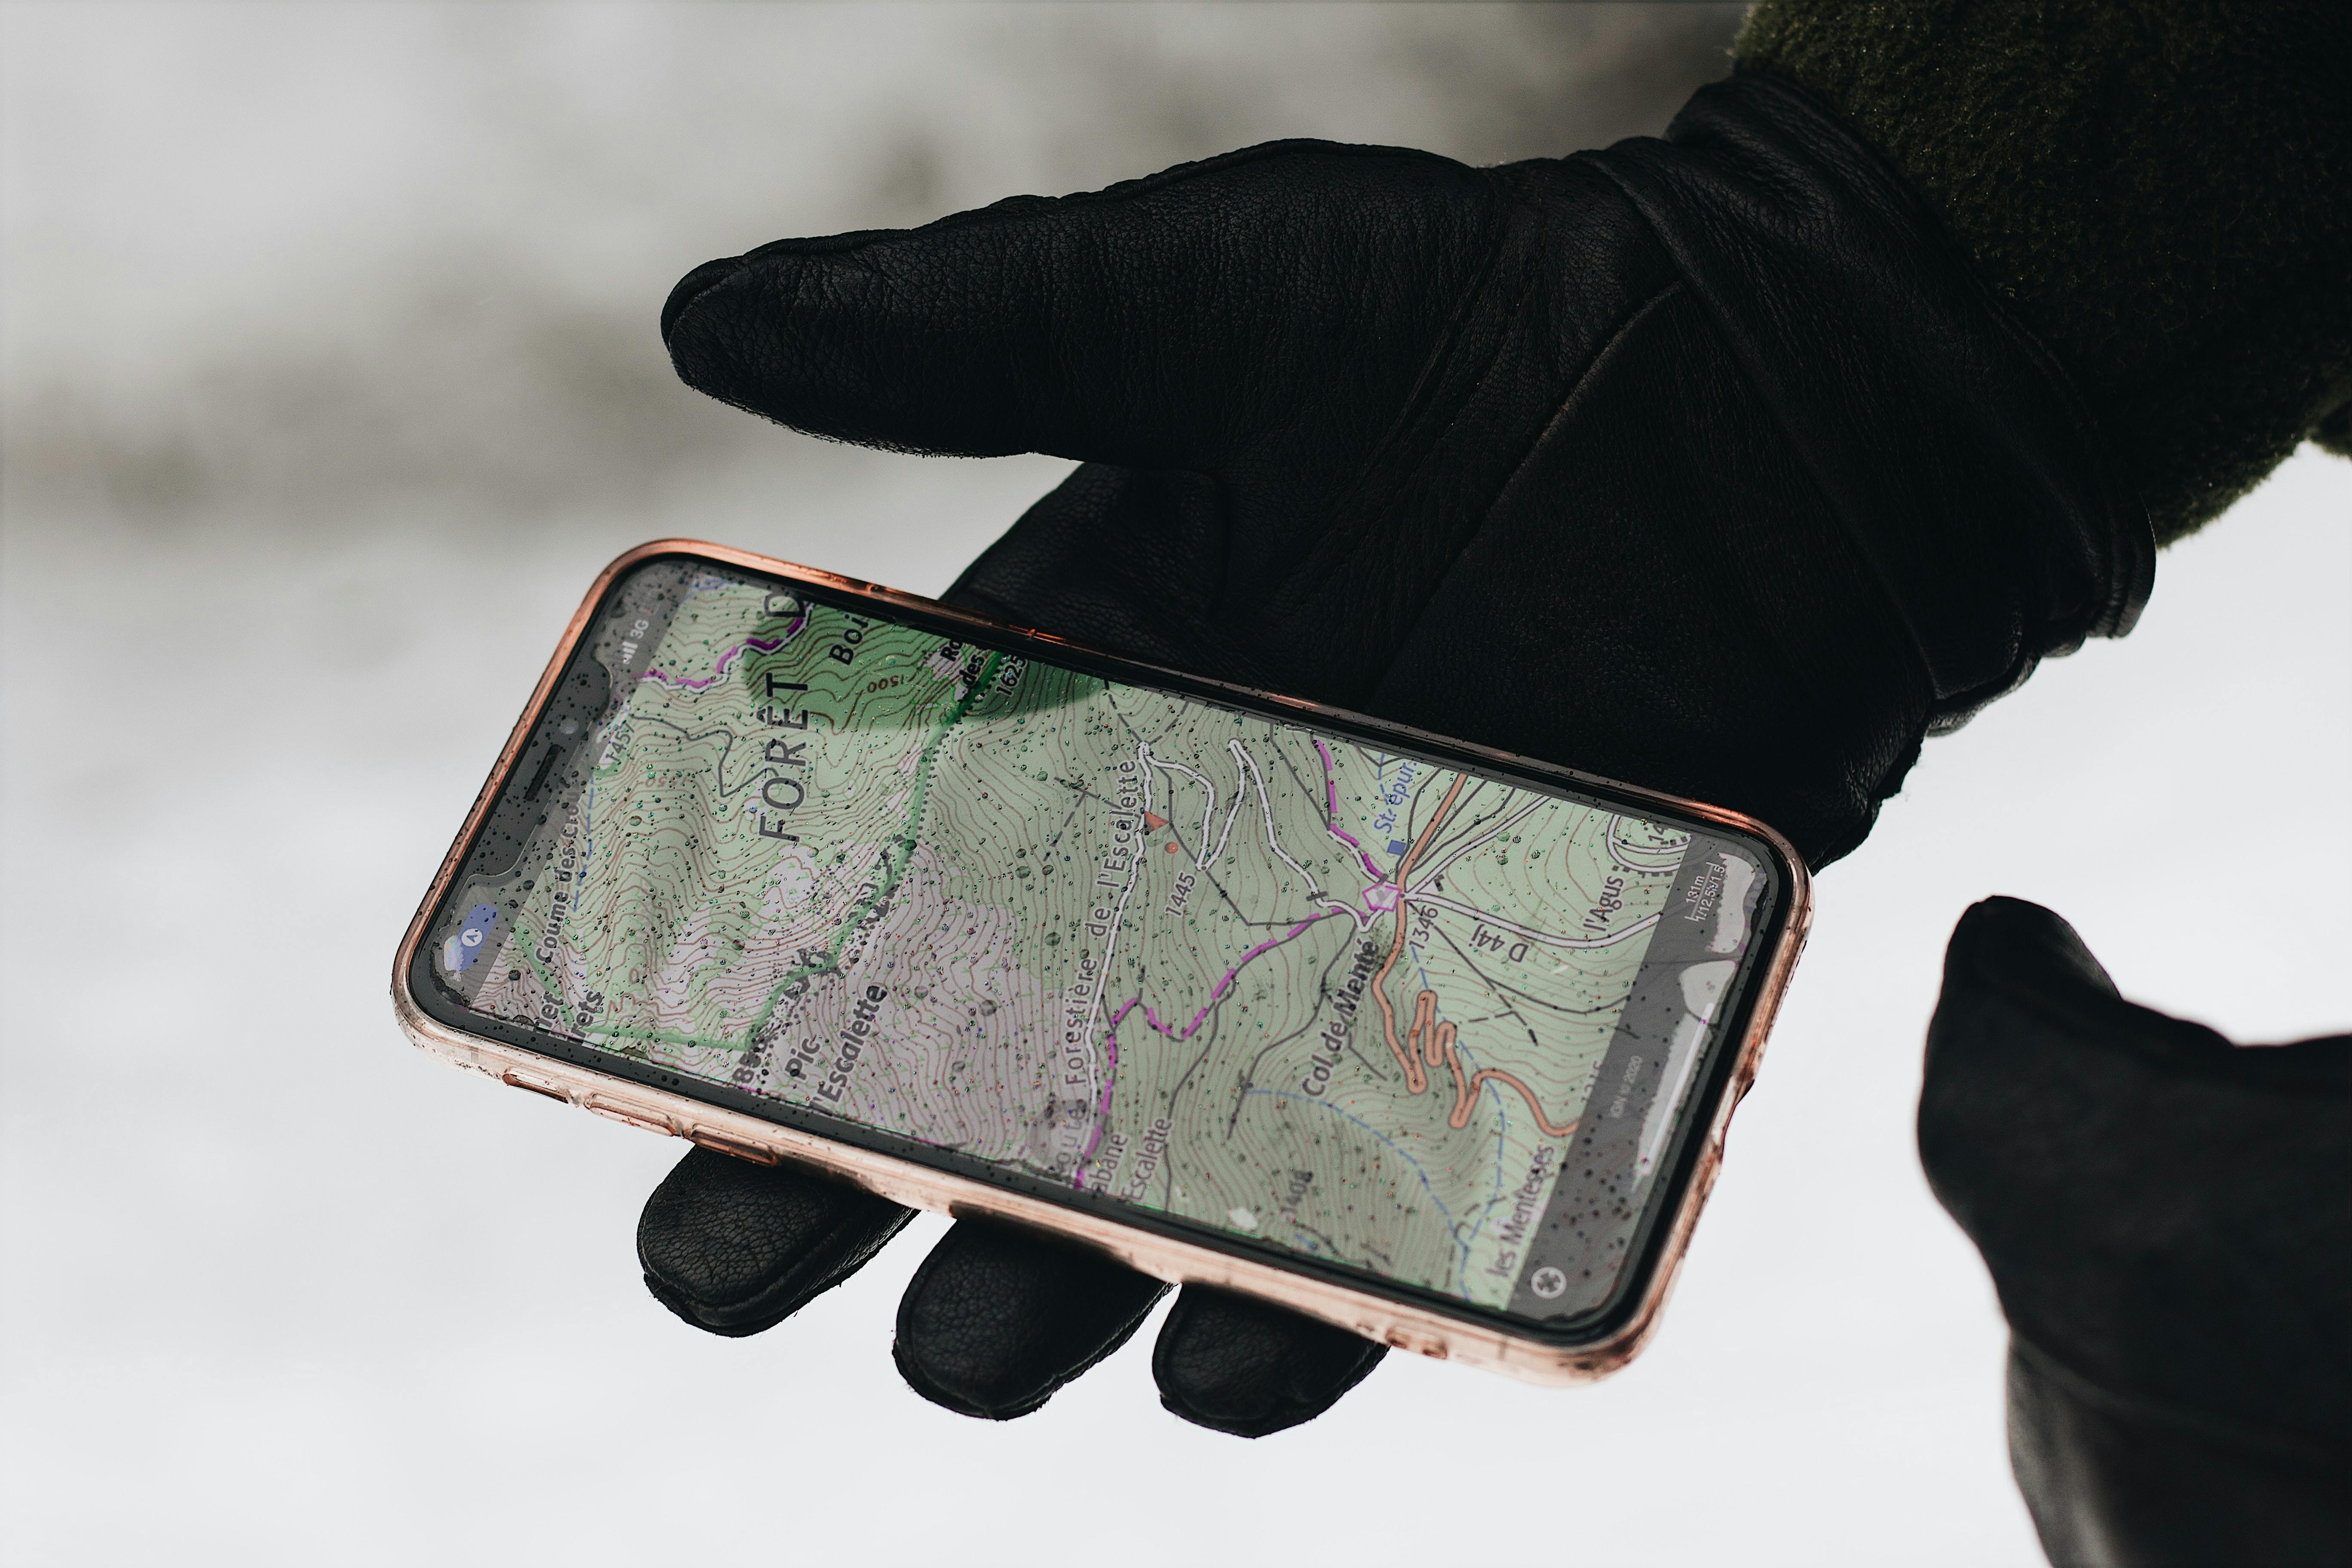 Gloved hands holding a phone with a map.